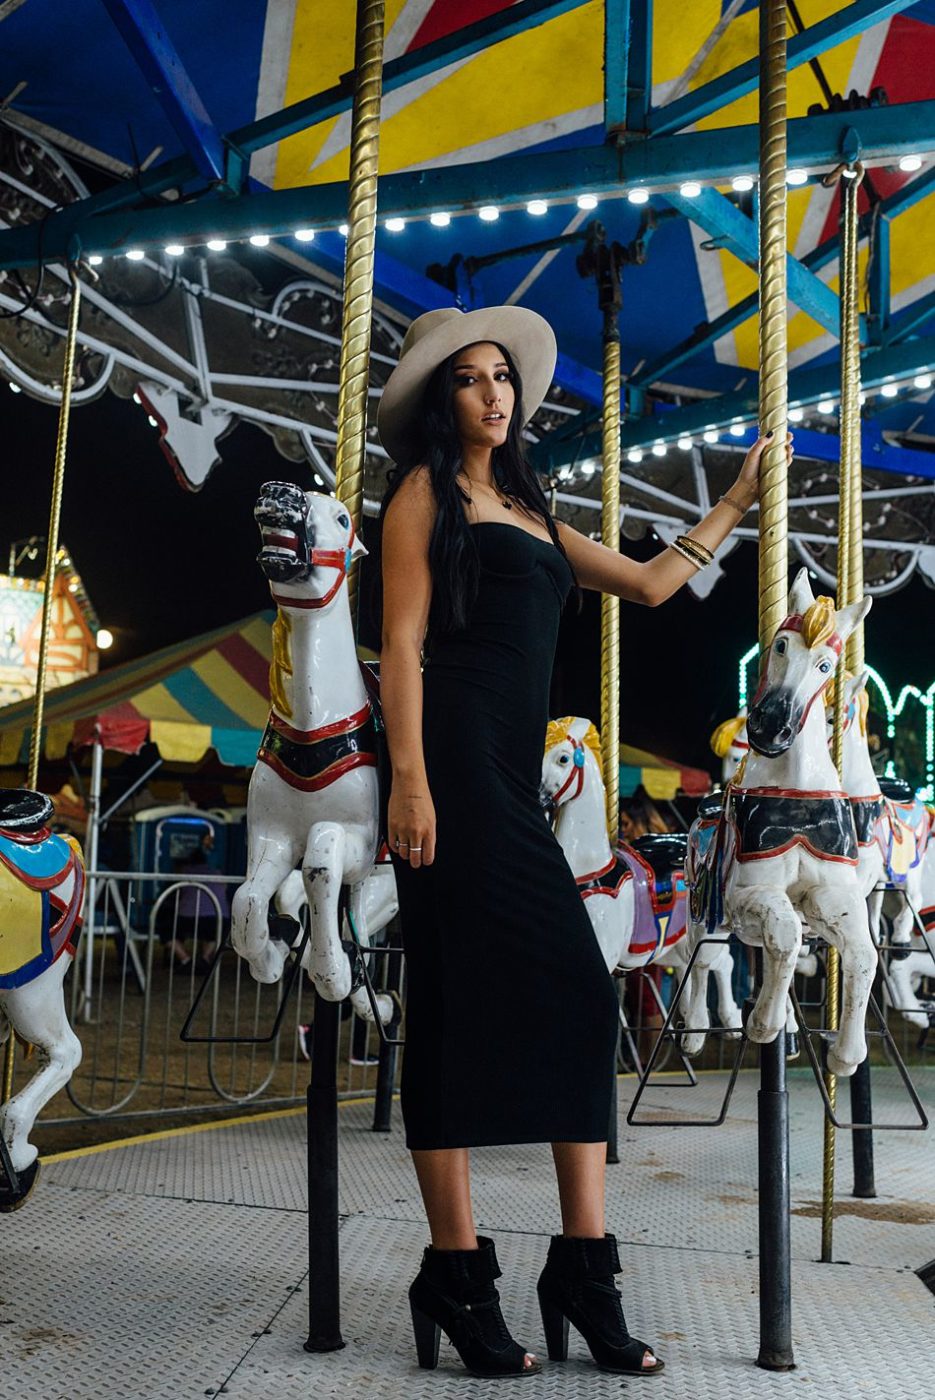 Pretty girl in black dress and hat on the carousel horse carnival ride